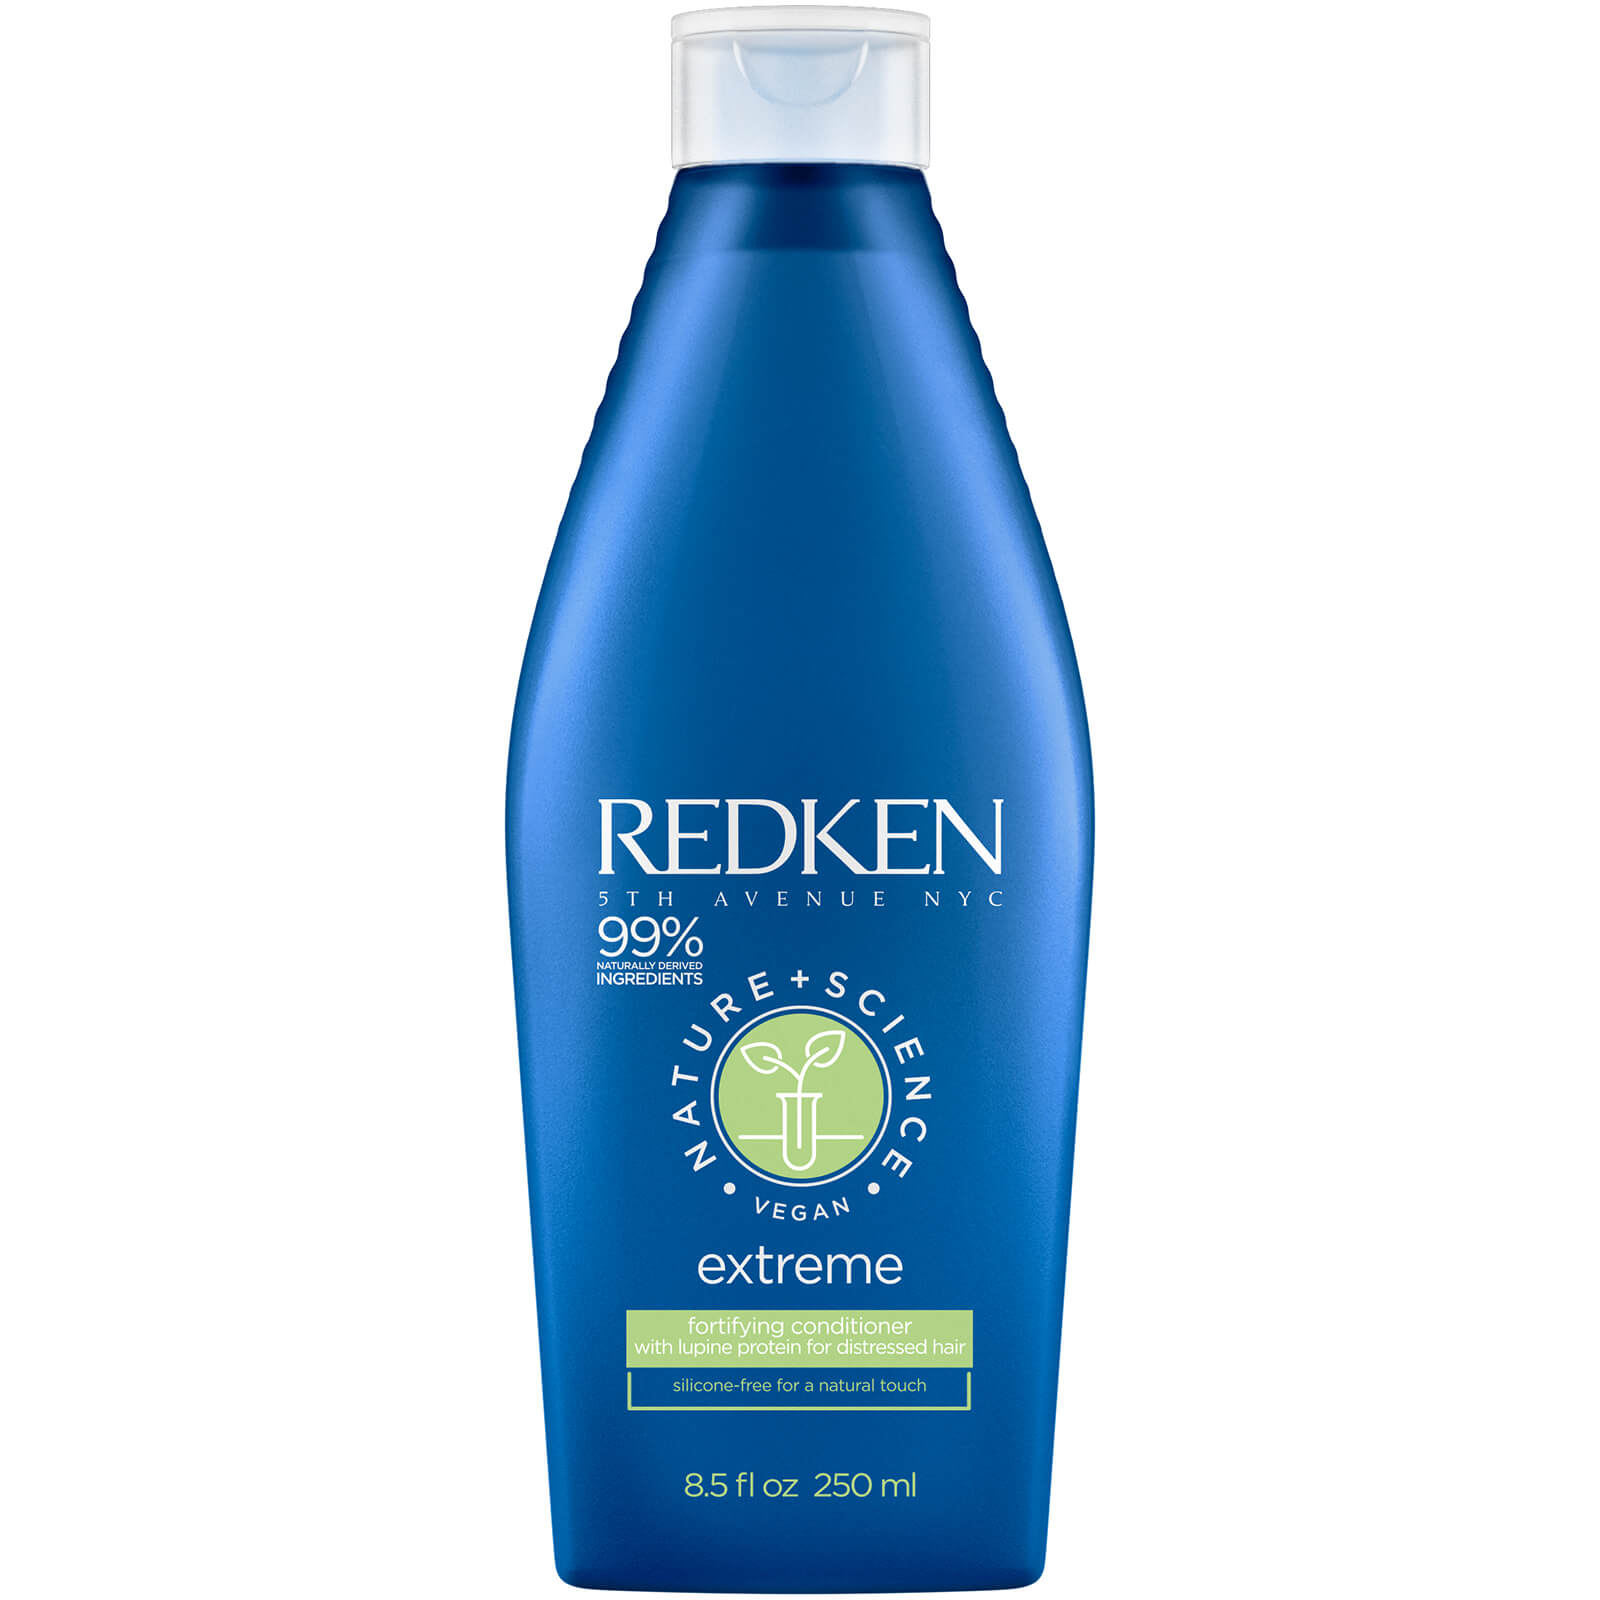 Redken Nature Science Extreme conditioner 250ml